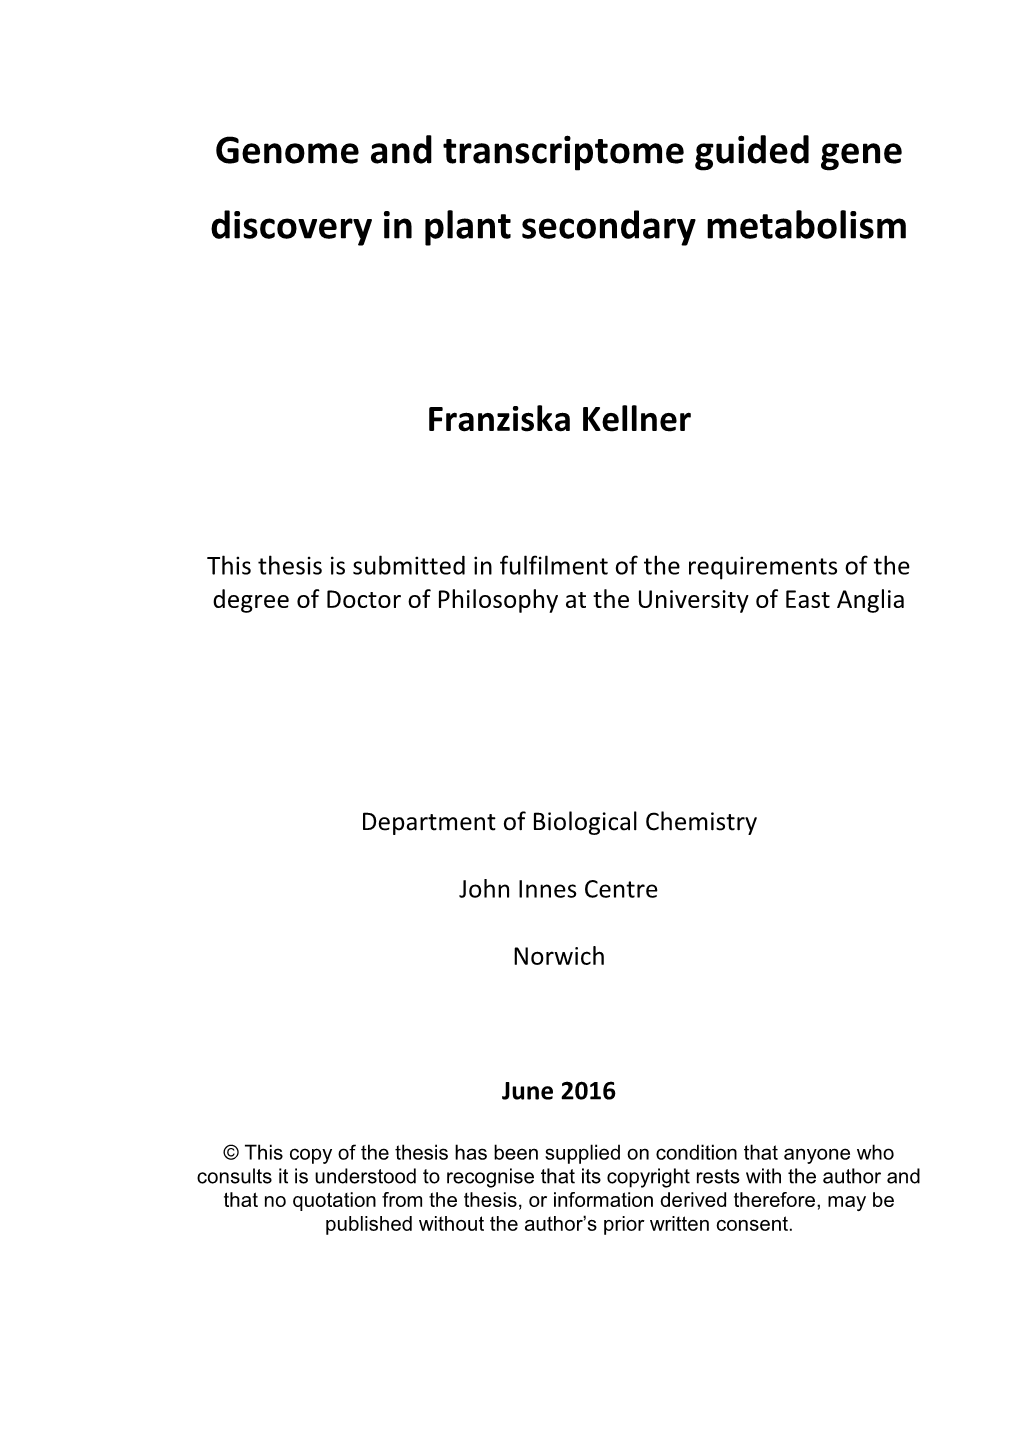 Genome and Transcriptome Guided Gene Discovery in Plant Secondary Metabolism